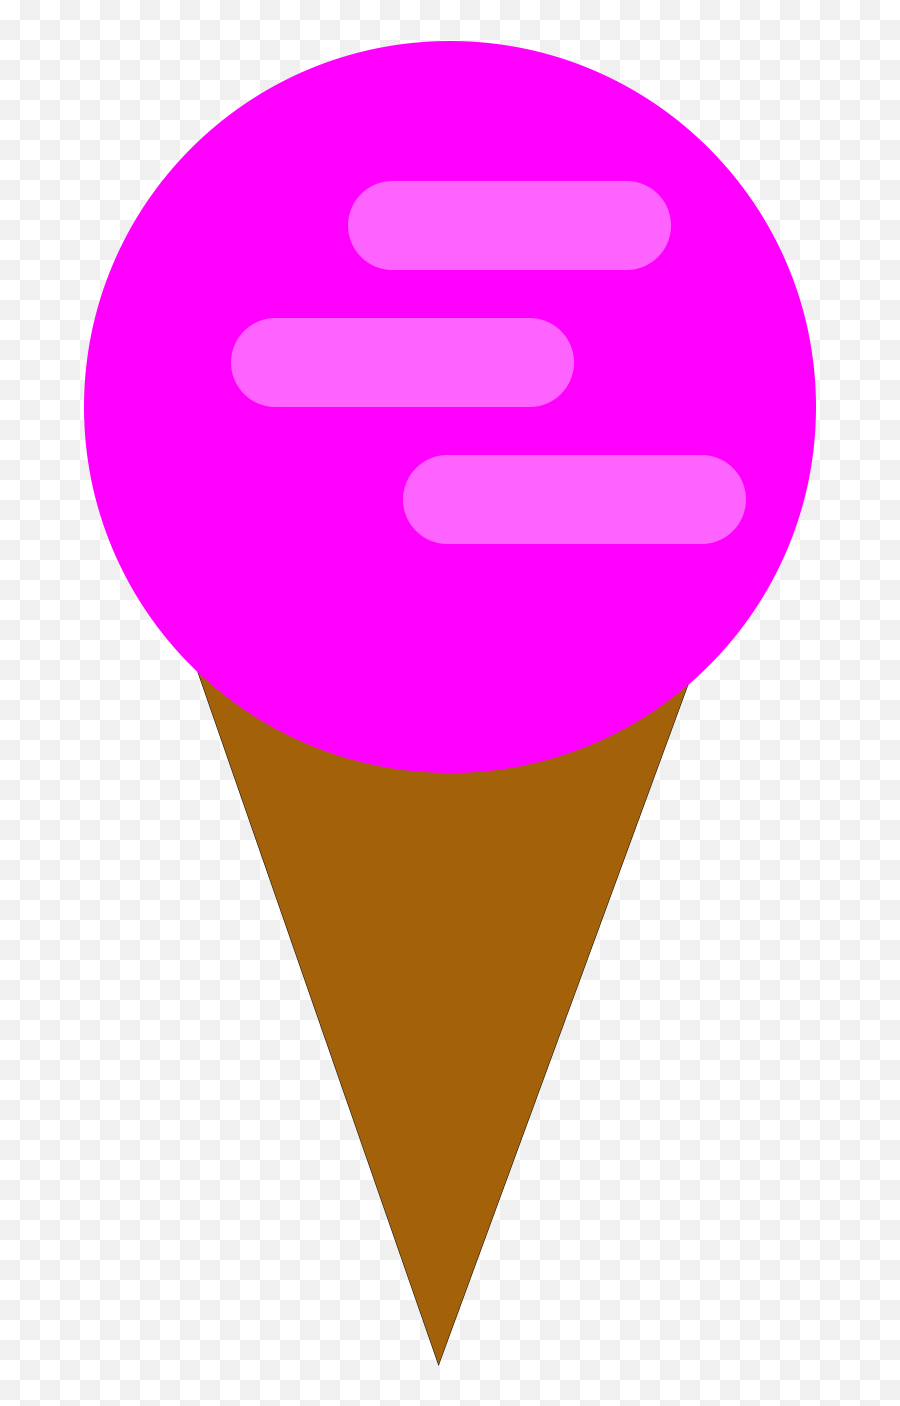 Free Ice Cream Scoop Silhouette Download Free Clip Art - Ice Cream Emoji,Ice Cream Sun Emoji